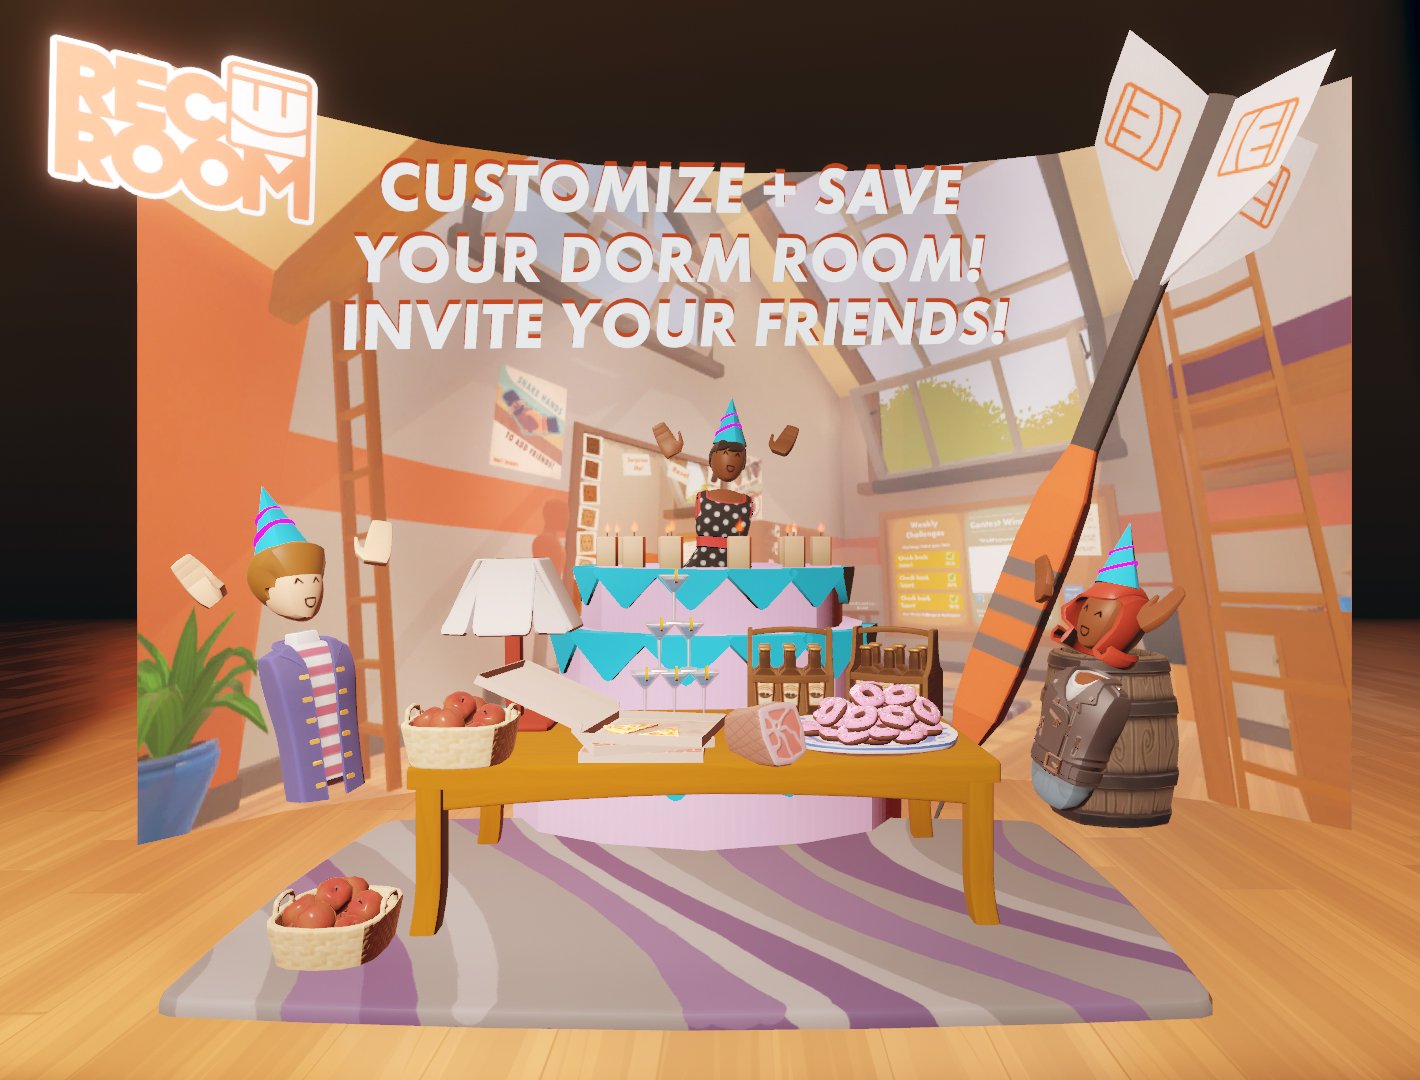 Rec Room On Twitter New Update Is Live The Social Dorm Edition Customize Save Your Dorm Room And Invite Your Friends Over Full Update Notes Https T Co Exnxmesuxg Recroom Https T Co J8nd2r0fen